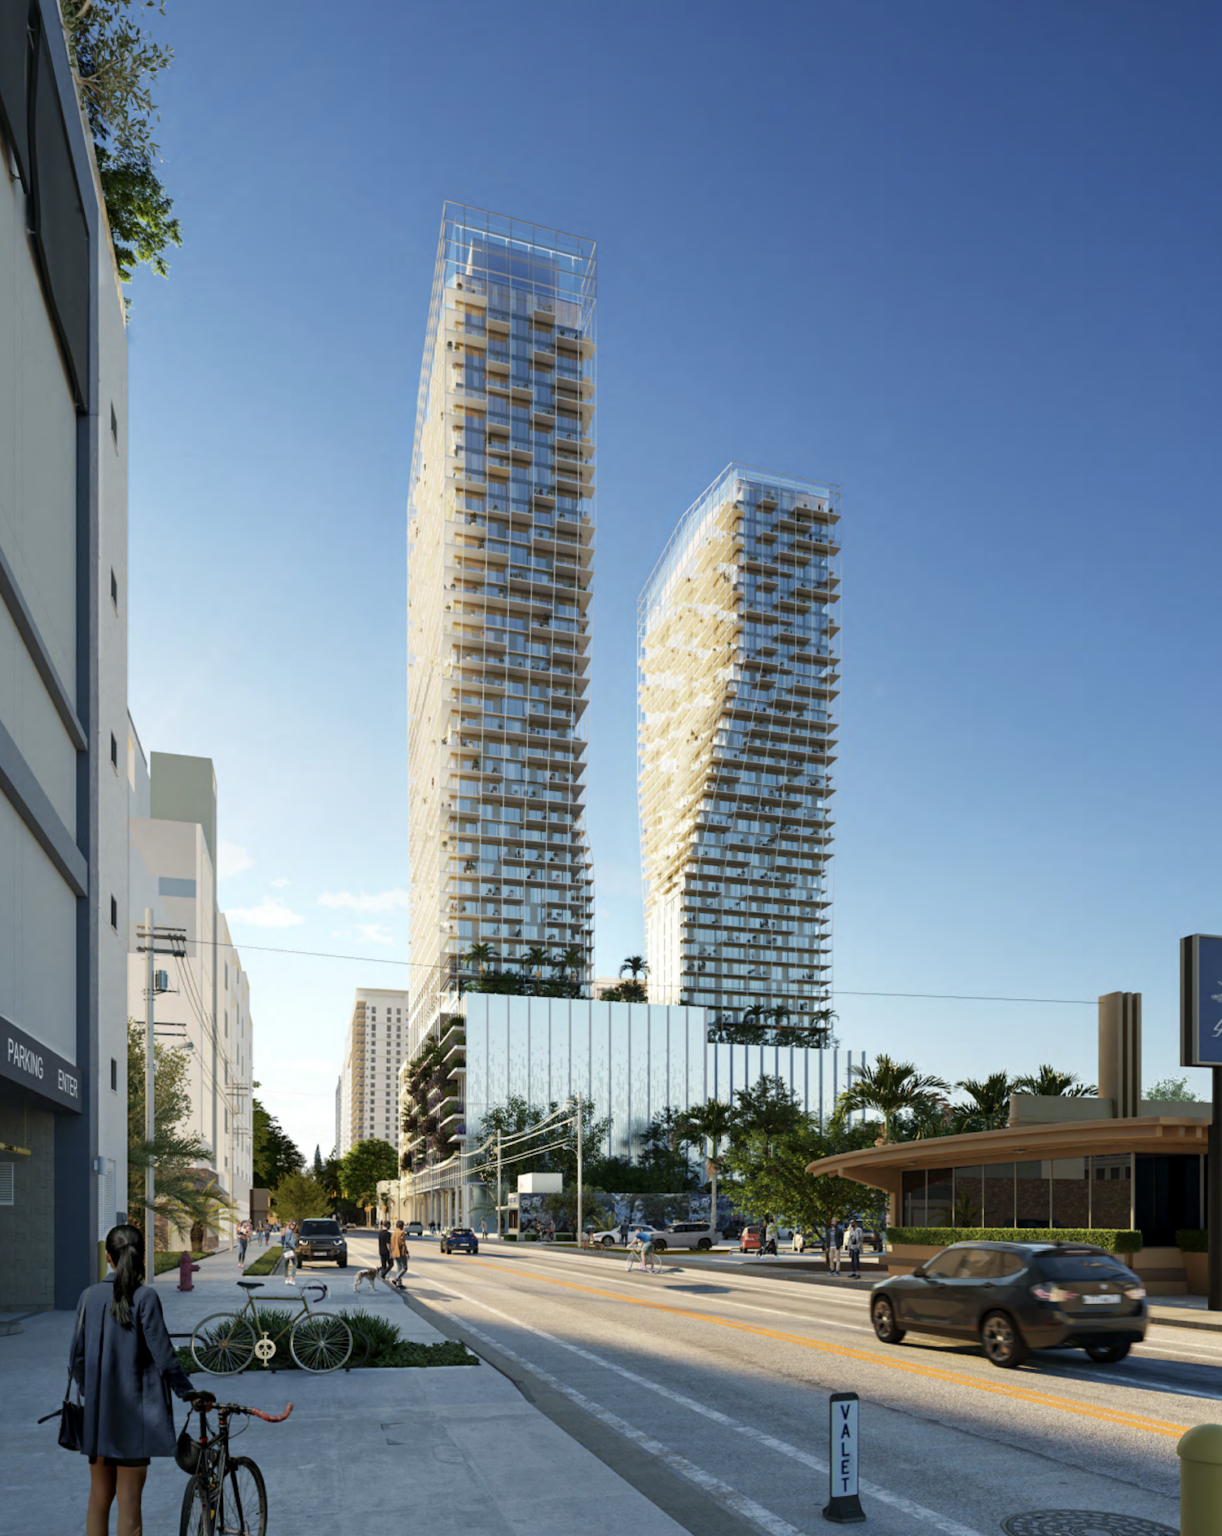 Brooklyn Based Developer Gets Faa Approval For Two 544 Foot Towers In Fort Lauderdale Florida